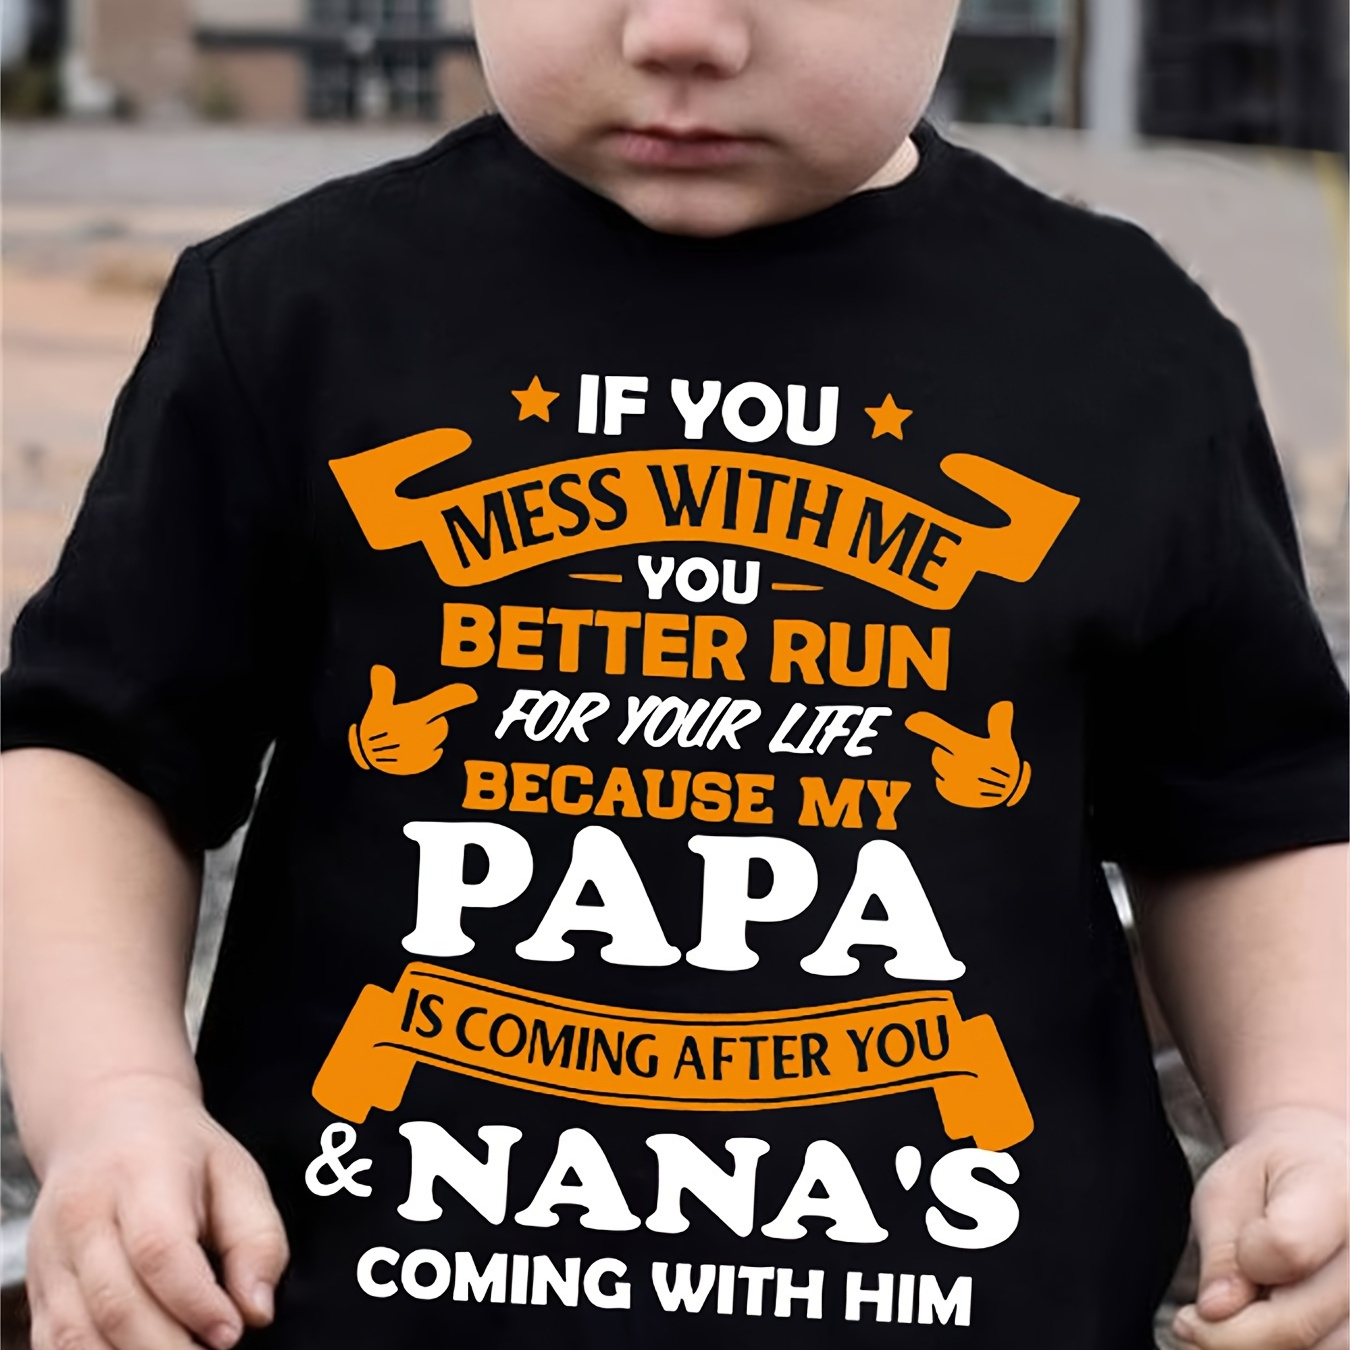 

My Papa Is Coming Print Boy's Casual Tees, Short Sleeve Crew Neck Comfy T-shirt Kids Summer Outdoor Sports Clothing